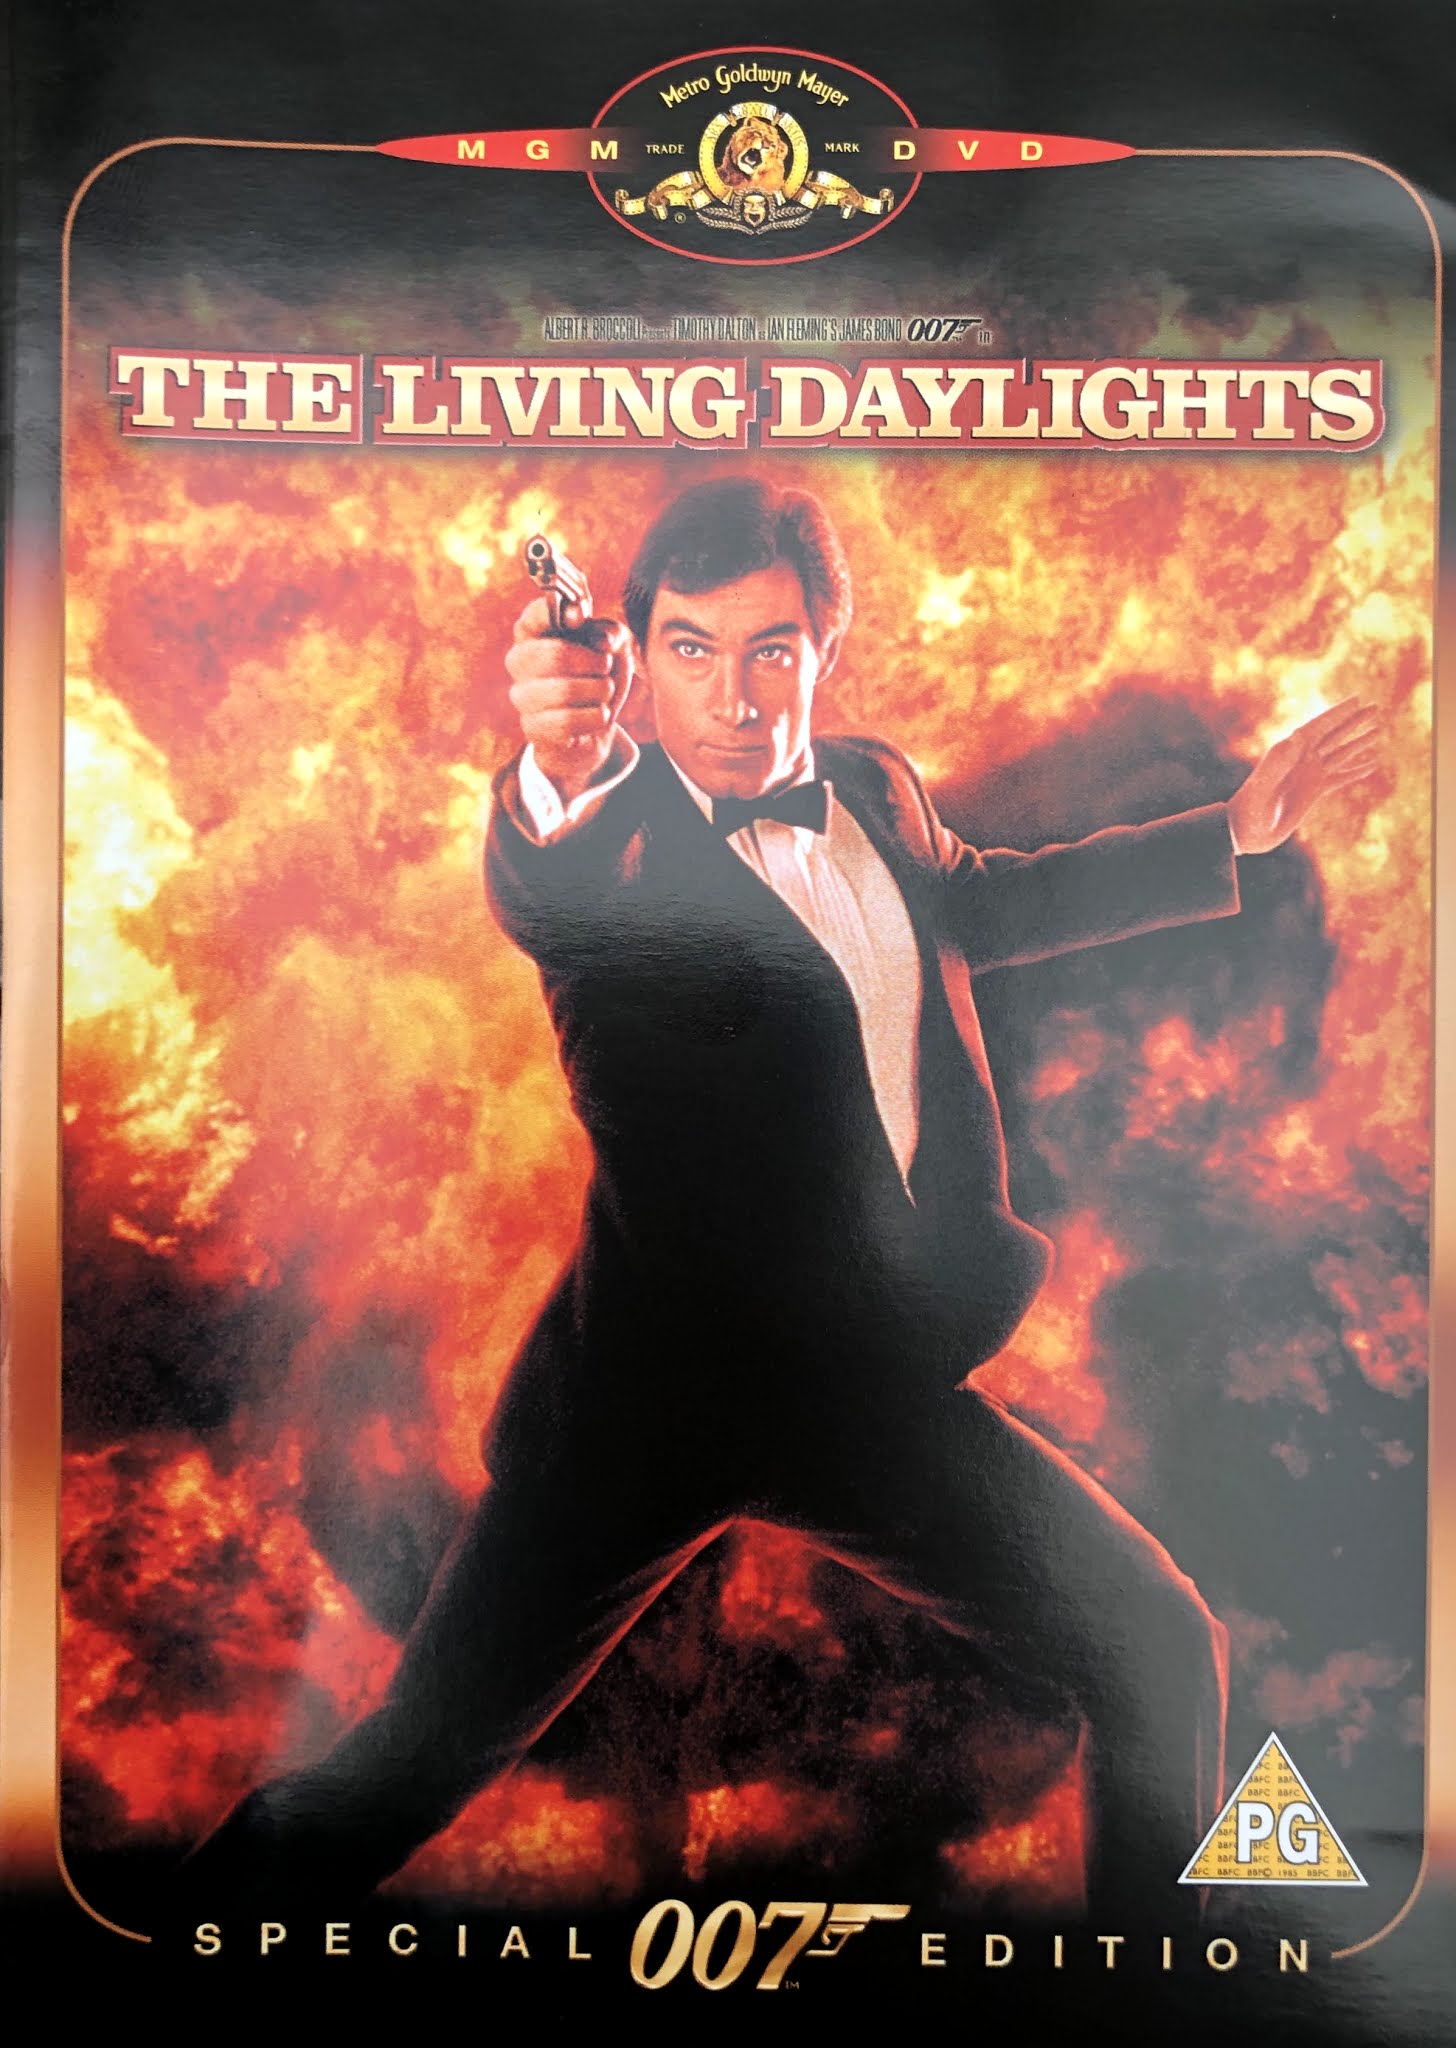 Project Bond: The Living Daylights | Big Stevie Cool